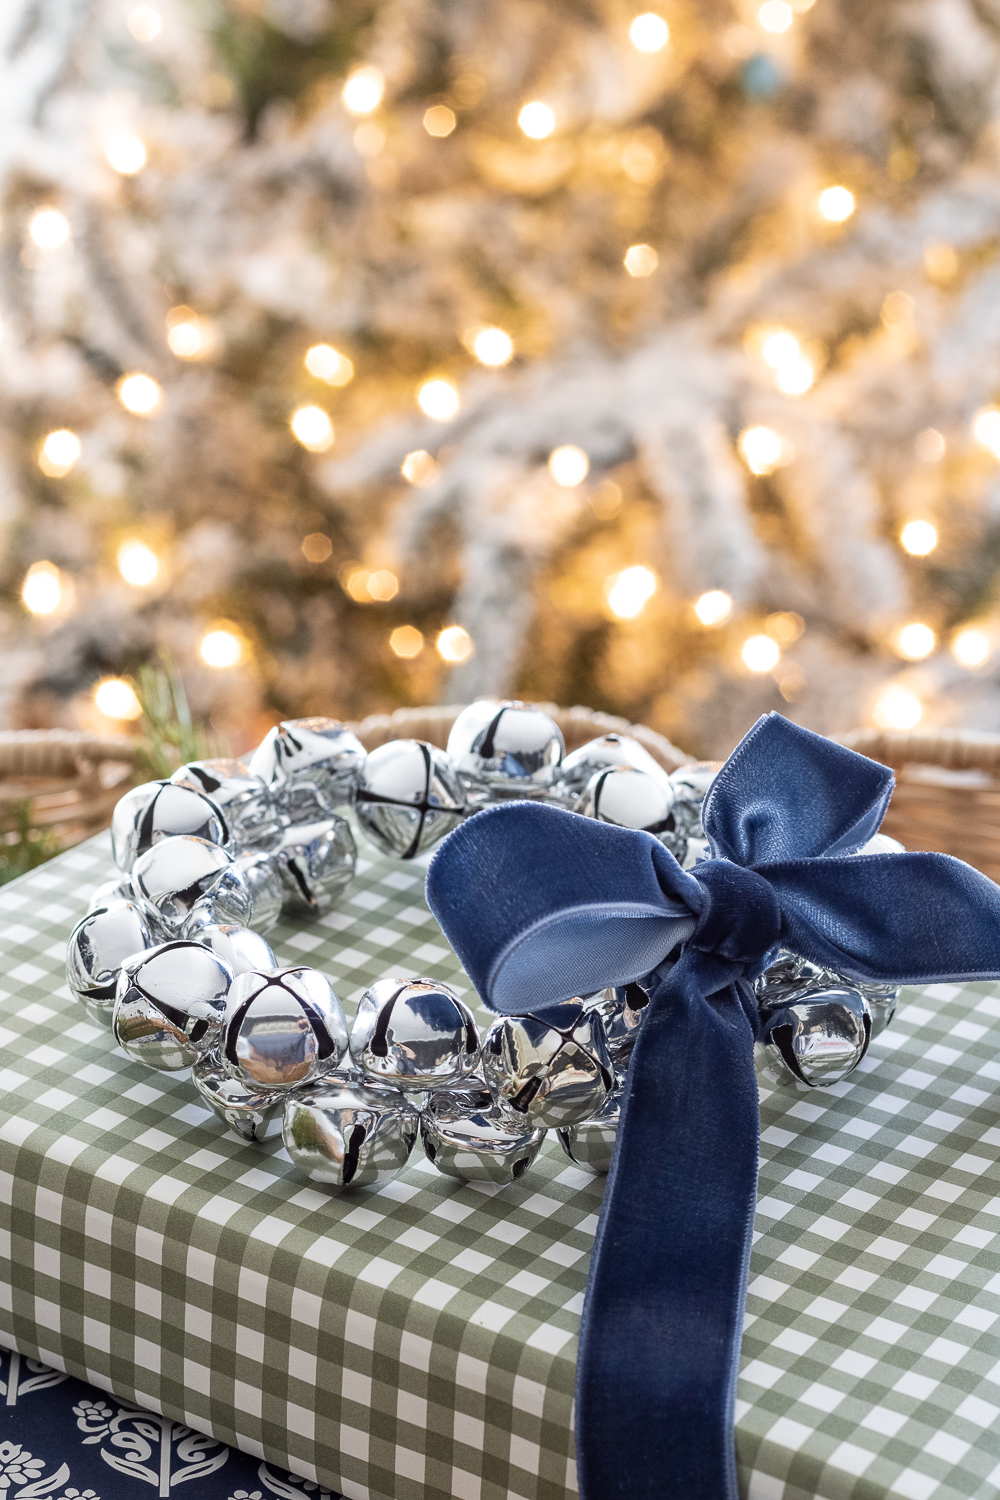 Buy Silver & White Jingle Bell Decorations